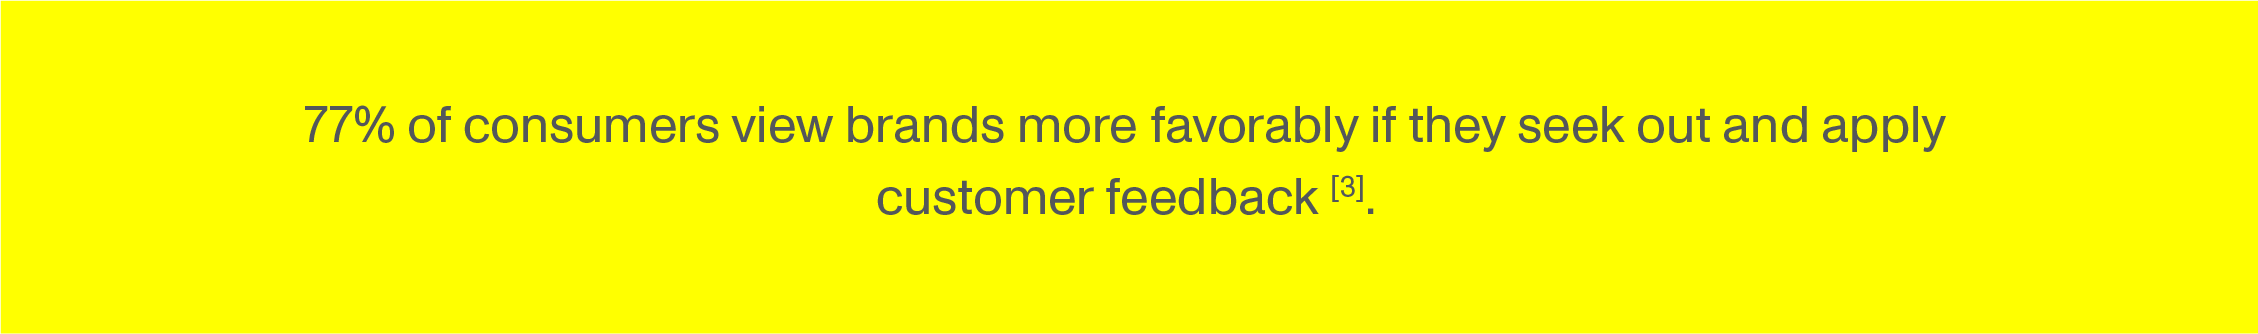 77% of consumers view brands more favorably if they seek out and apply customer feedback